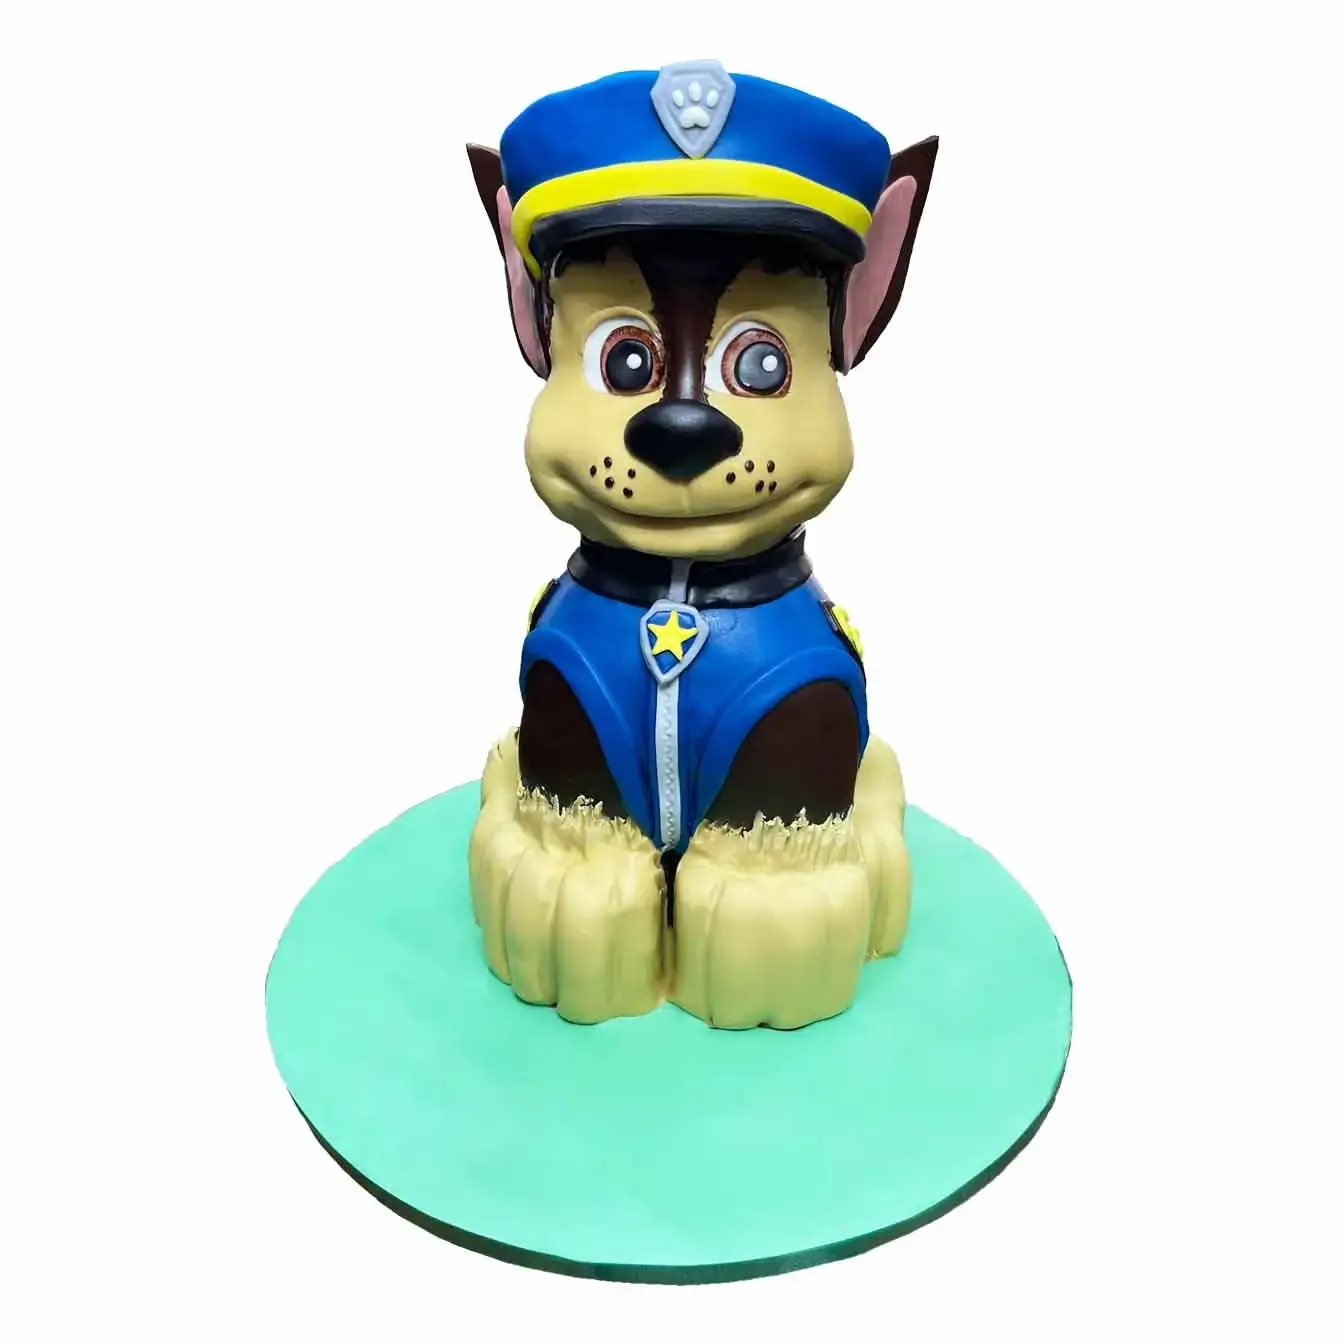 3D Chase Cake from PAW Patrol: A standing cake featuring Chase, the German Shepherd police pup, with his blue police hat and lifelike fur texture